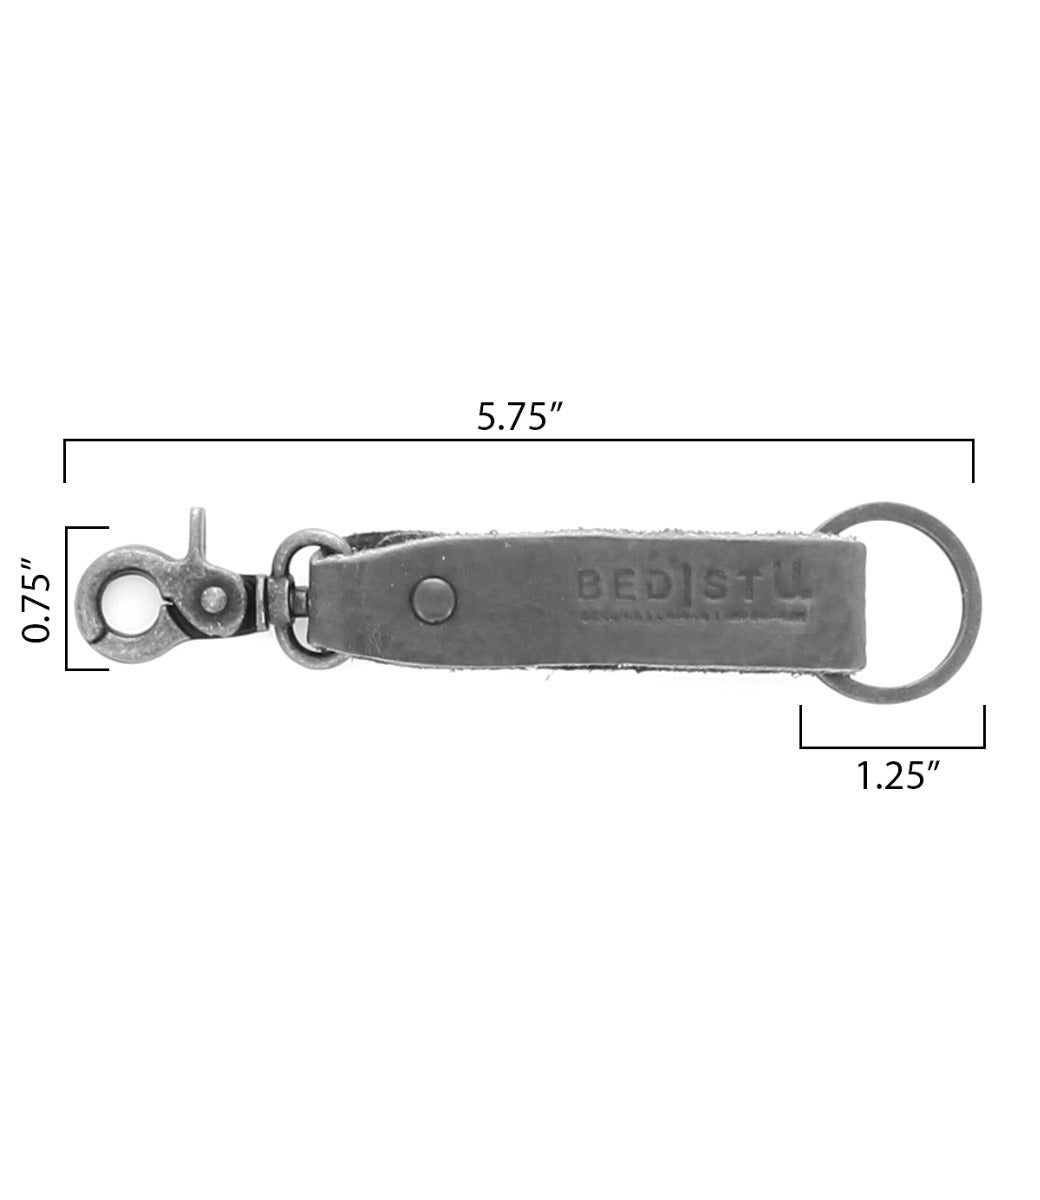 A picture of a Bed Stu Keygrab key ring with measurements.